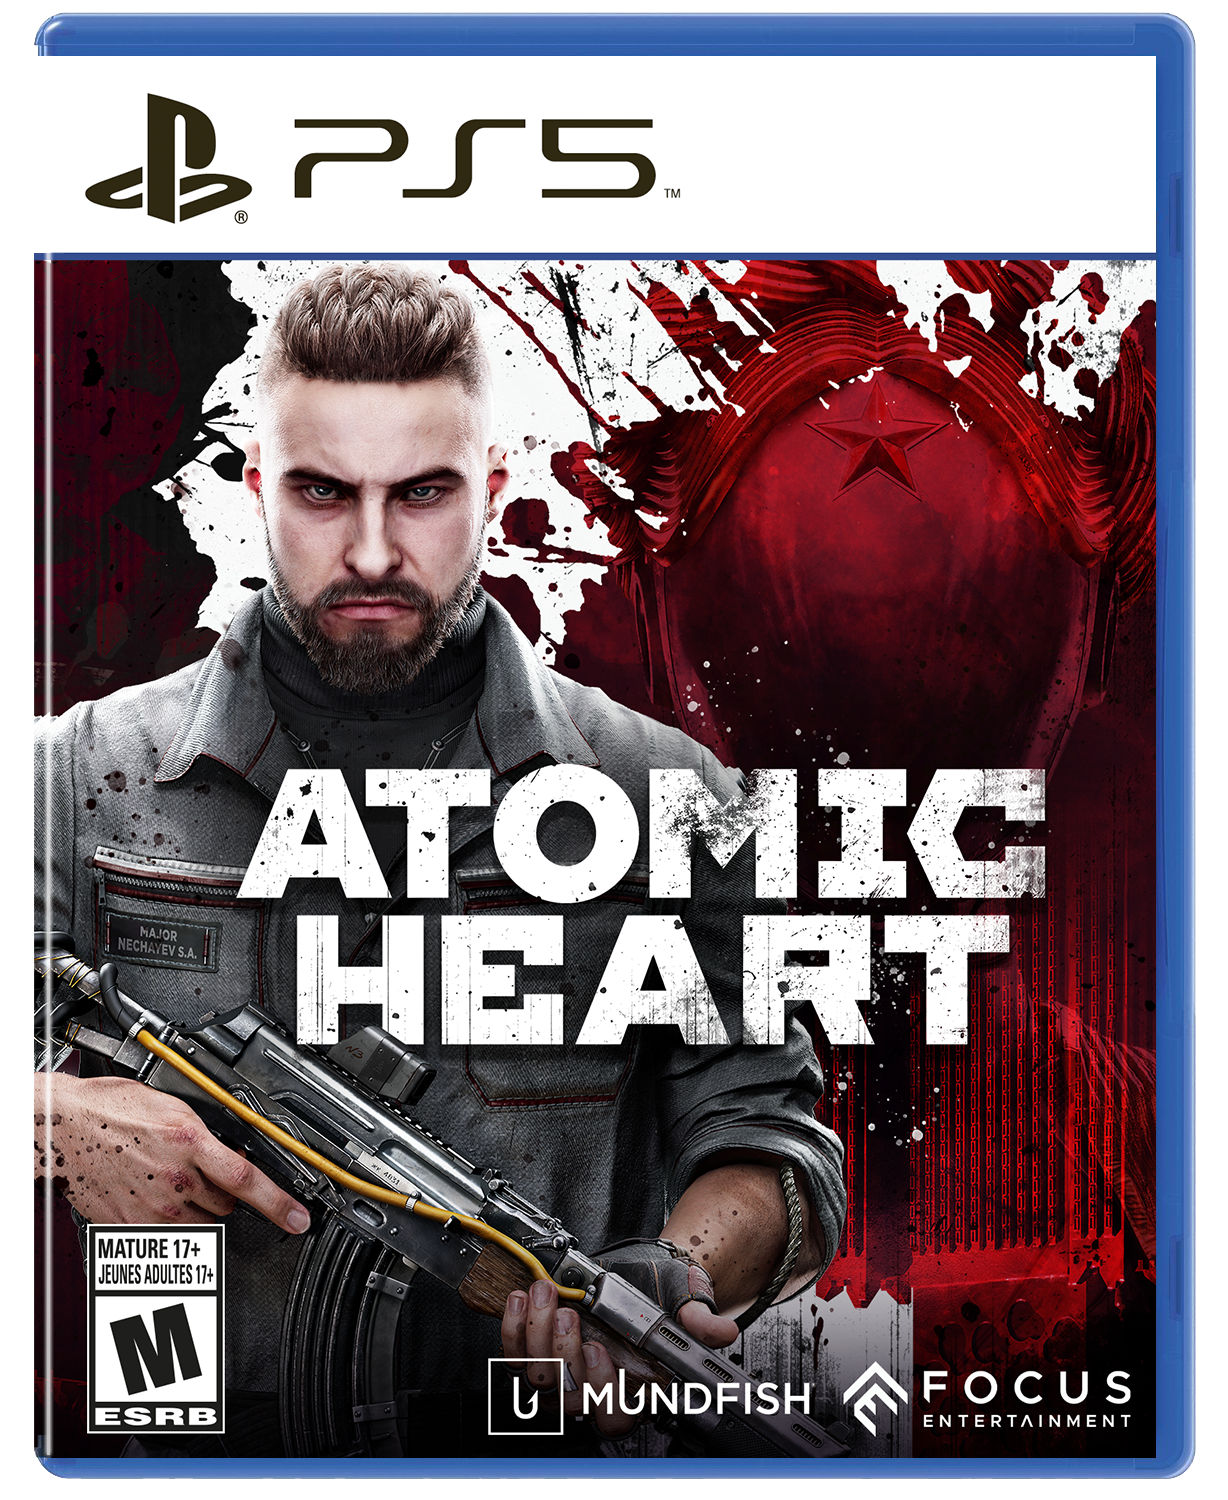 Atomic Heart Game Review